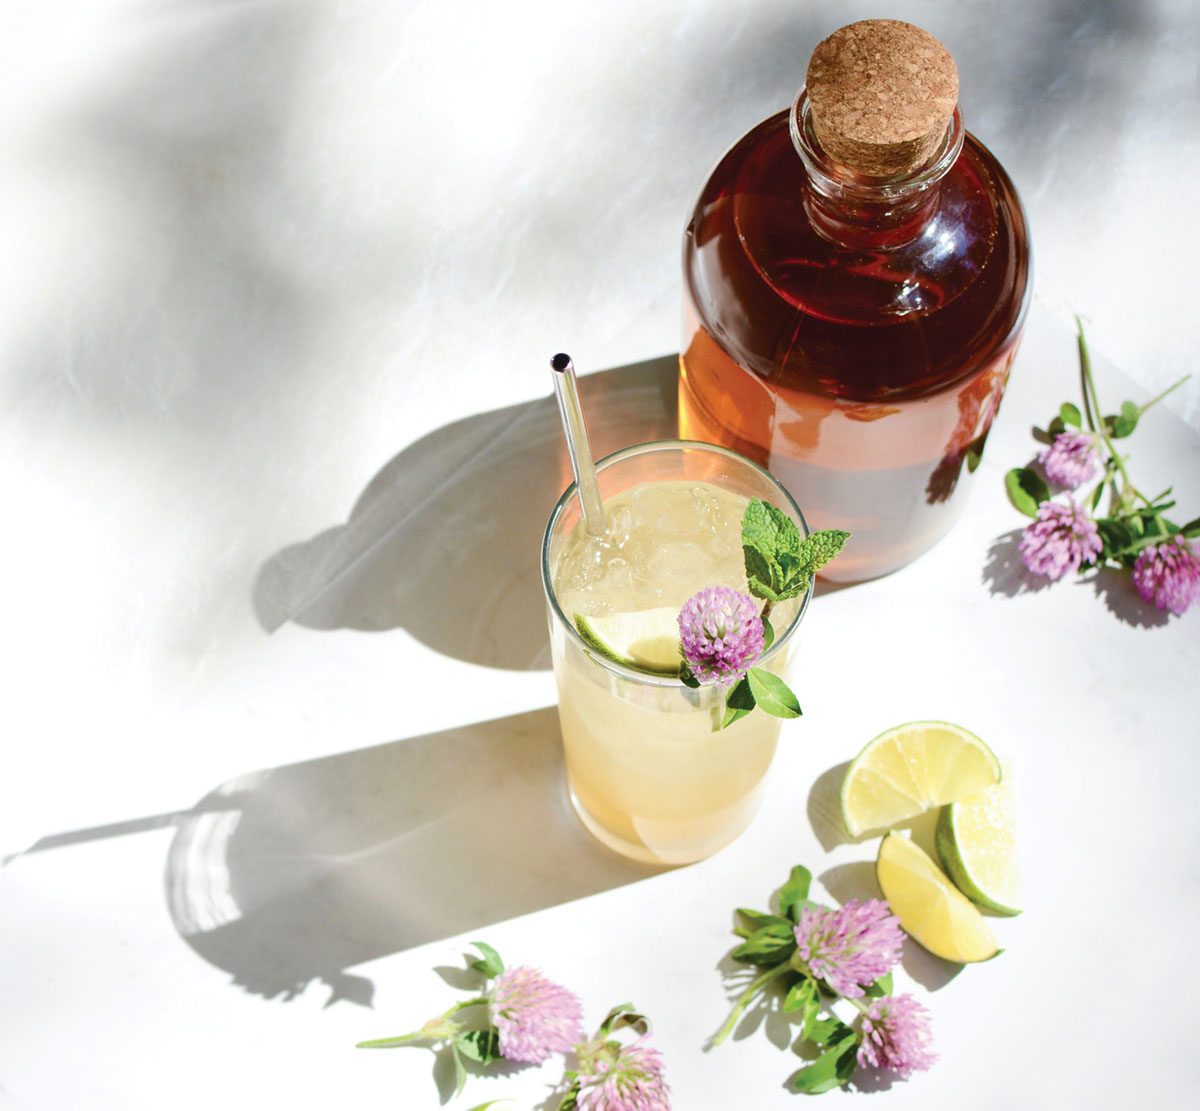 photo of a bottle of Clover Sun Tea, and a glass of the Cloverjito cocktail, garnished with lime wedges and purple clover flowers